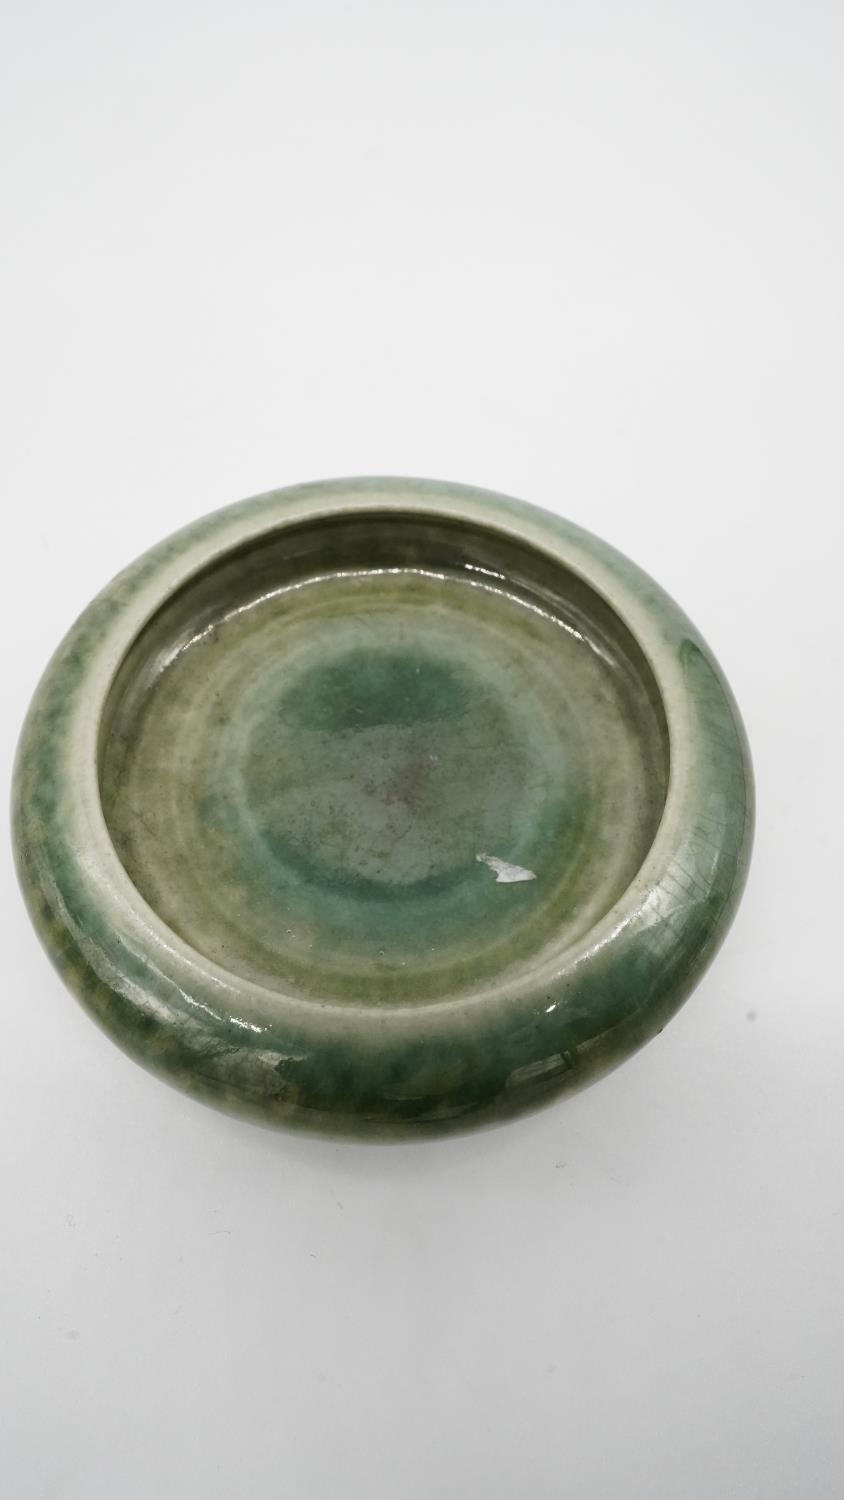 Late Ming-Qing dynasty green glazed bowl with unglazed foot. H.6 W.13 D.13 - Image 2 of 4